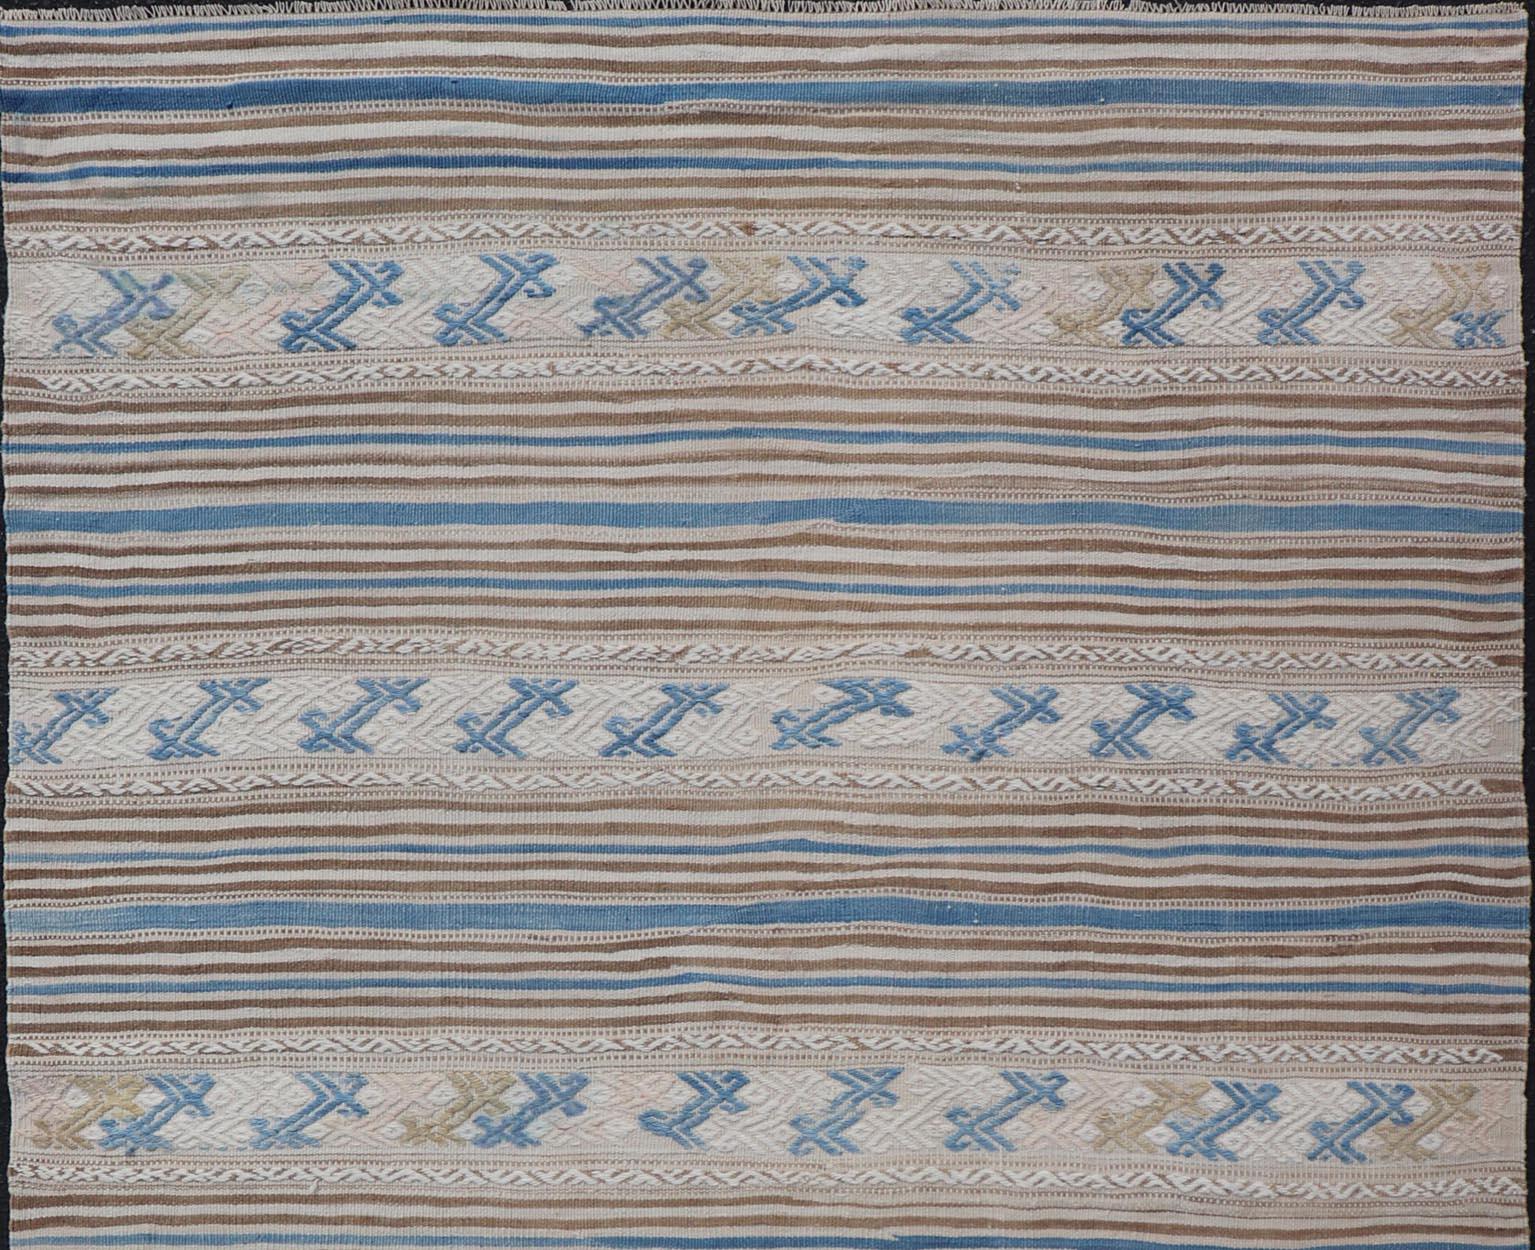 Turkish Hand Woven Flat-Weave Embroideries Kilim in Taupe, Brown, and Blue  2